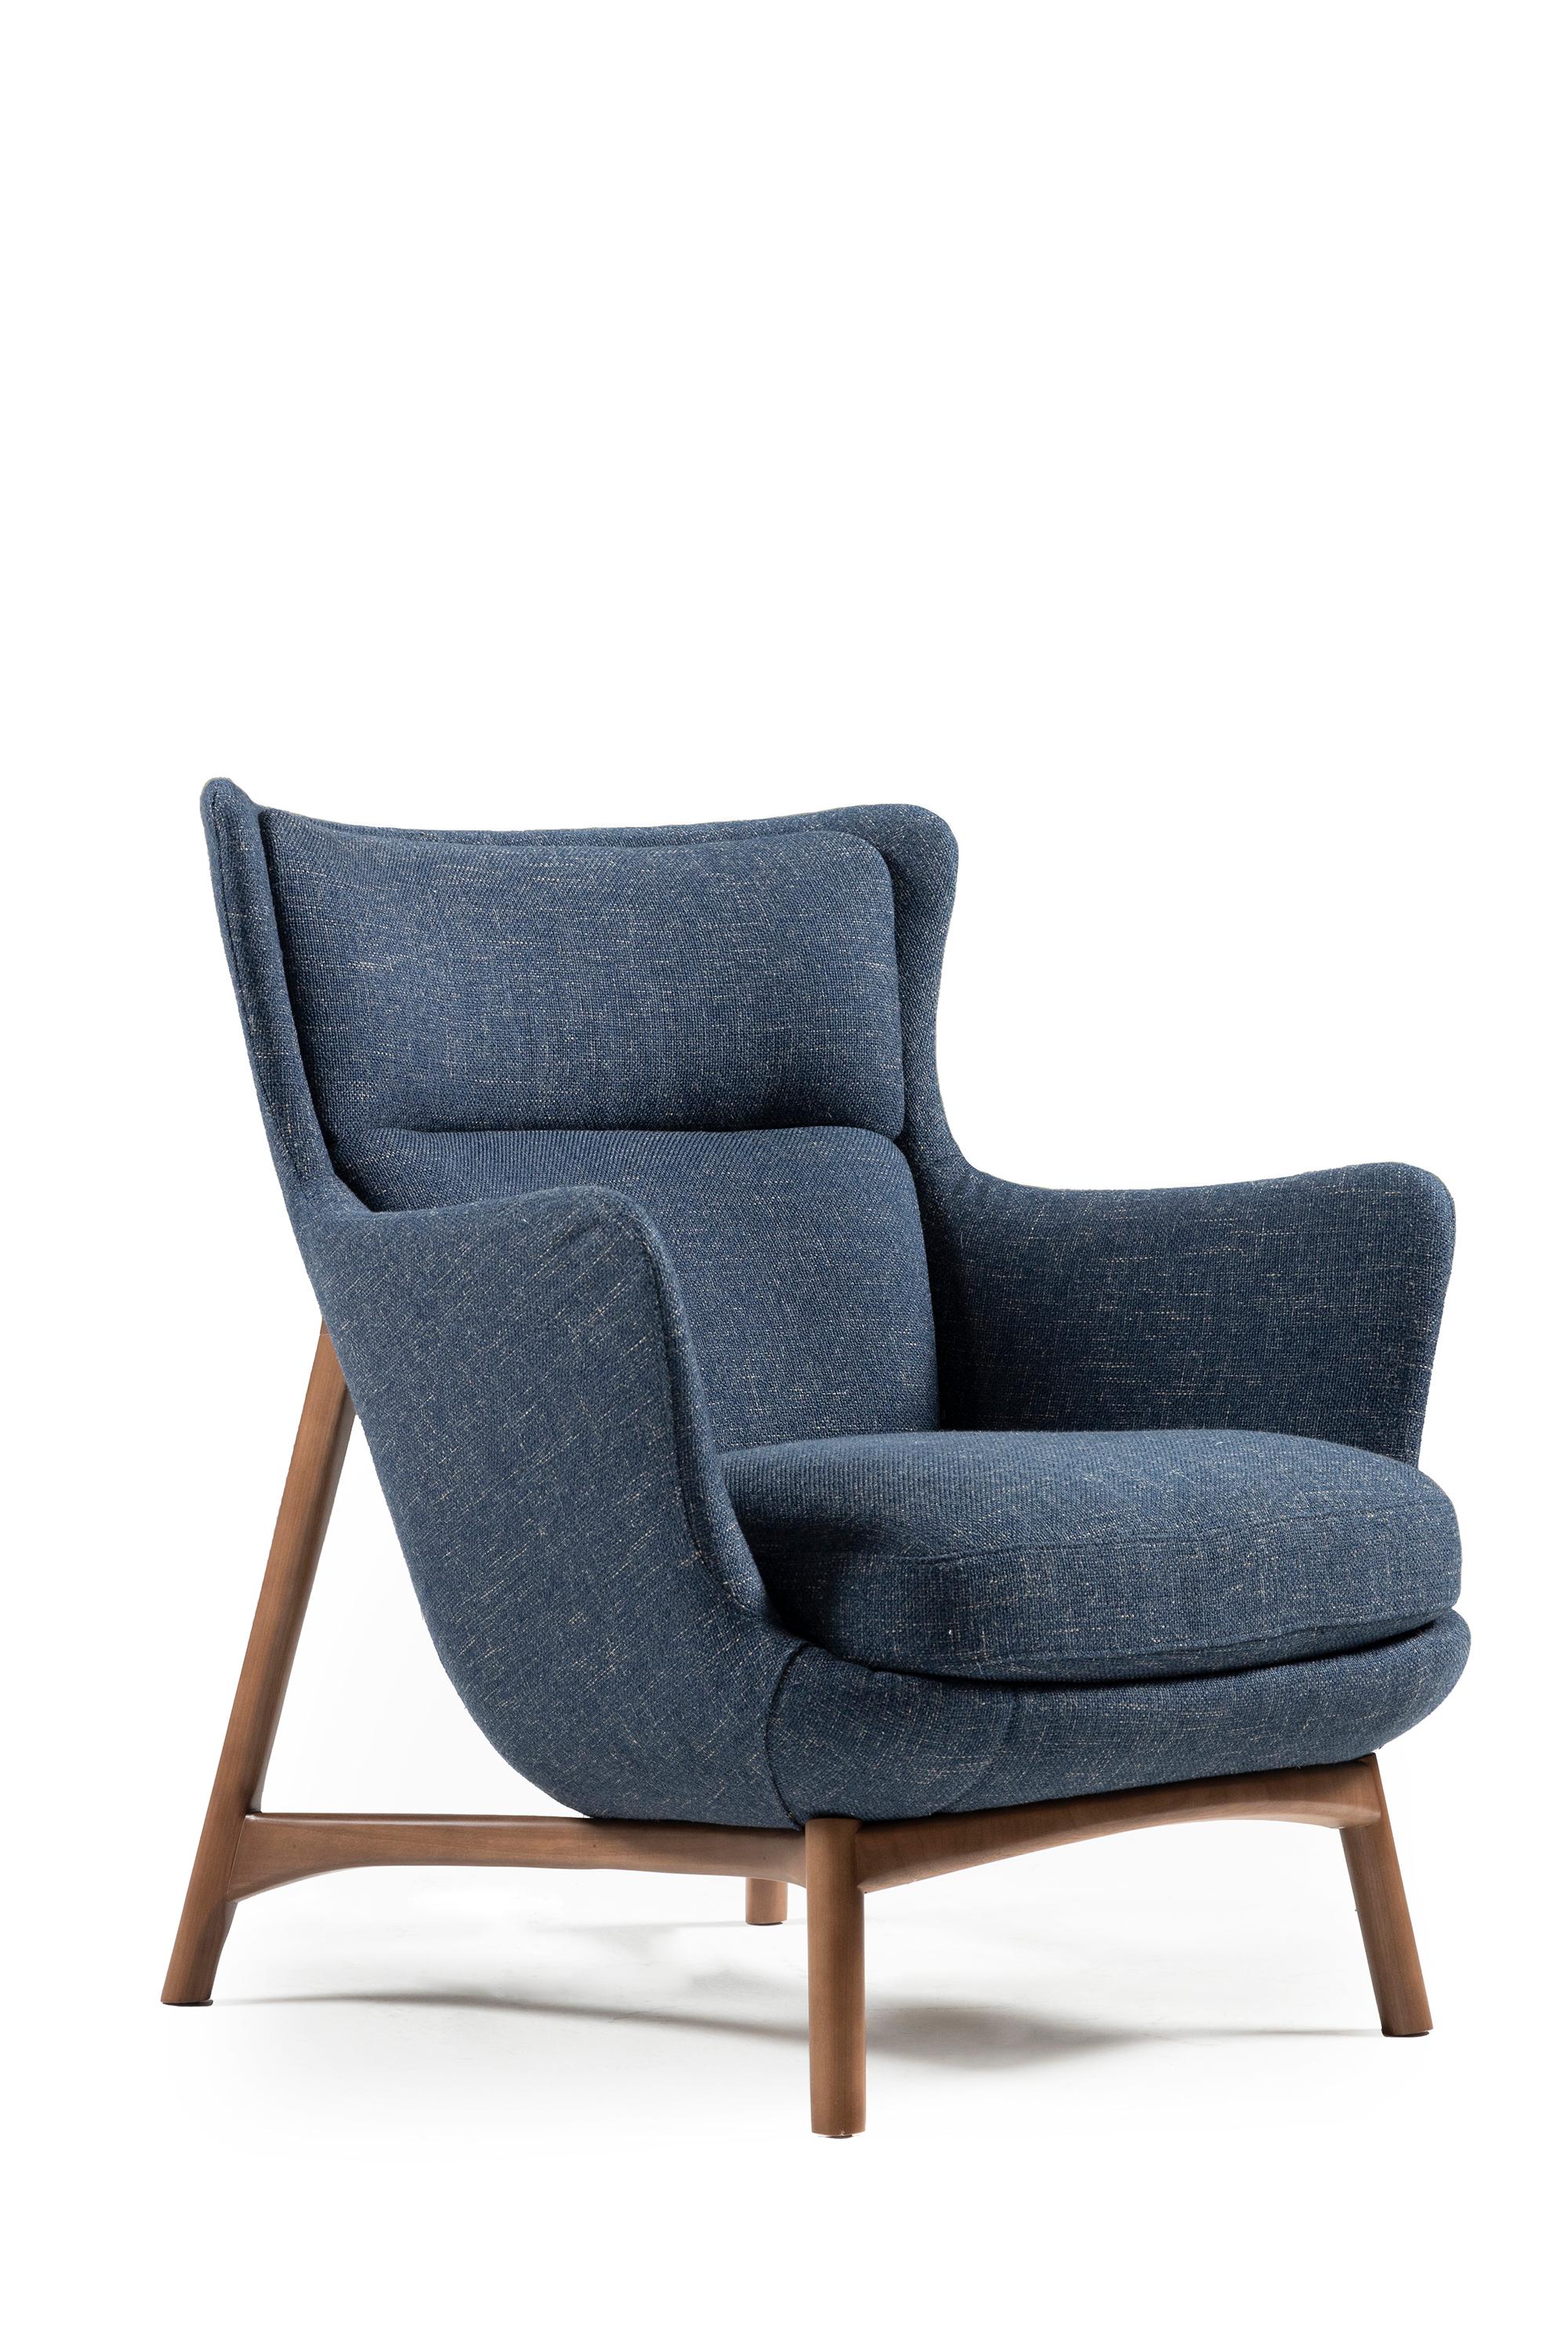 Sublime High Armchairs, Contemporary Style in Solid Wood, Textiles Upholstery For Sale 7